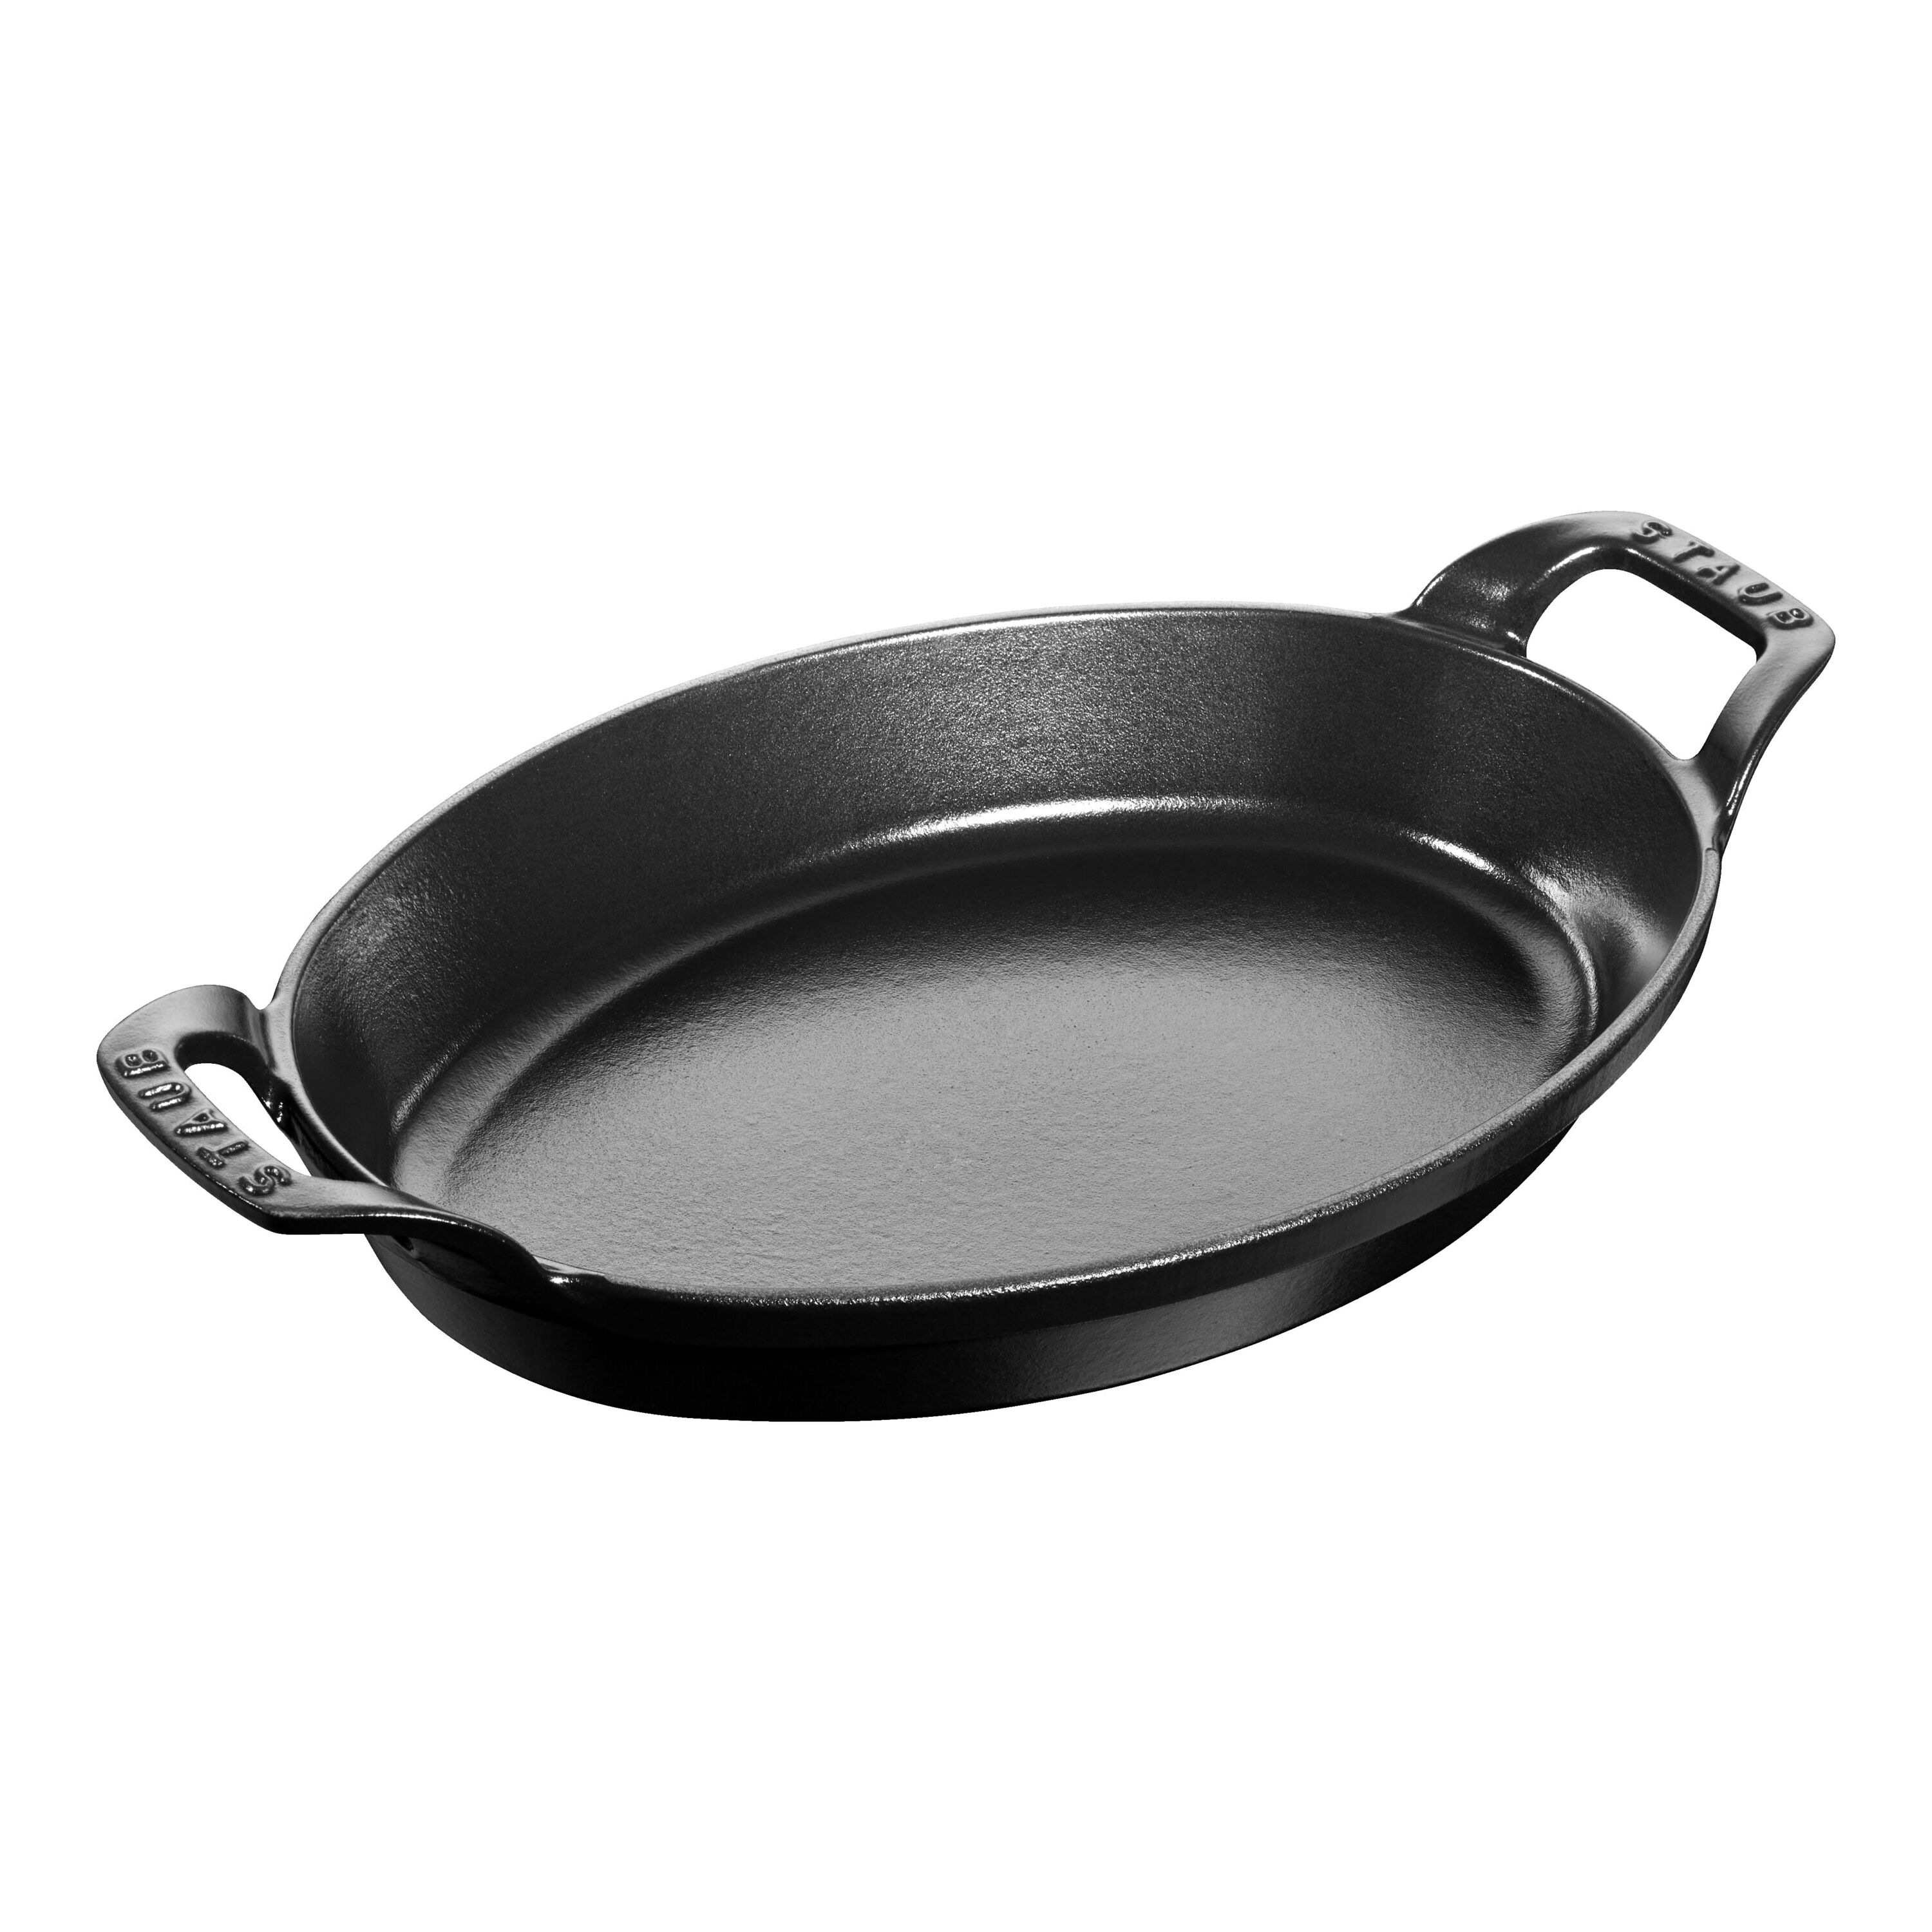 SlowCook Cast iron grey oval Casserole - compatible with oven and